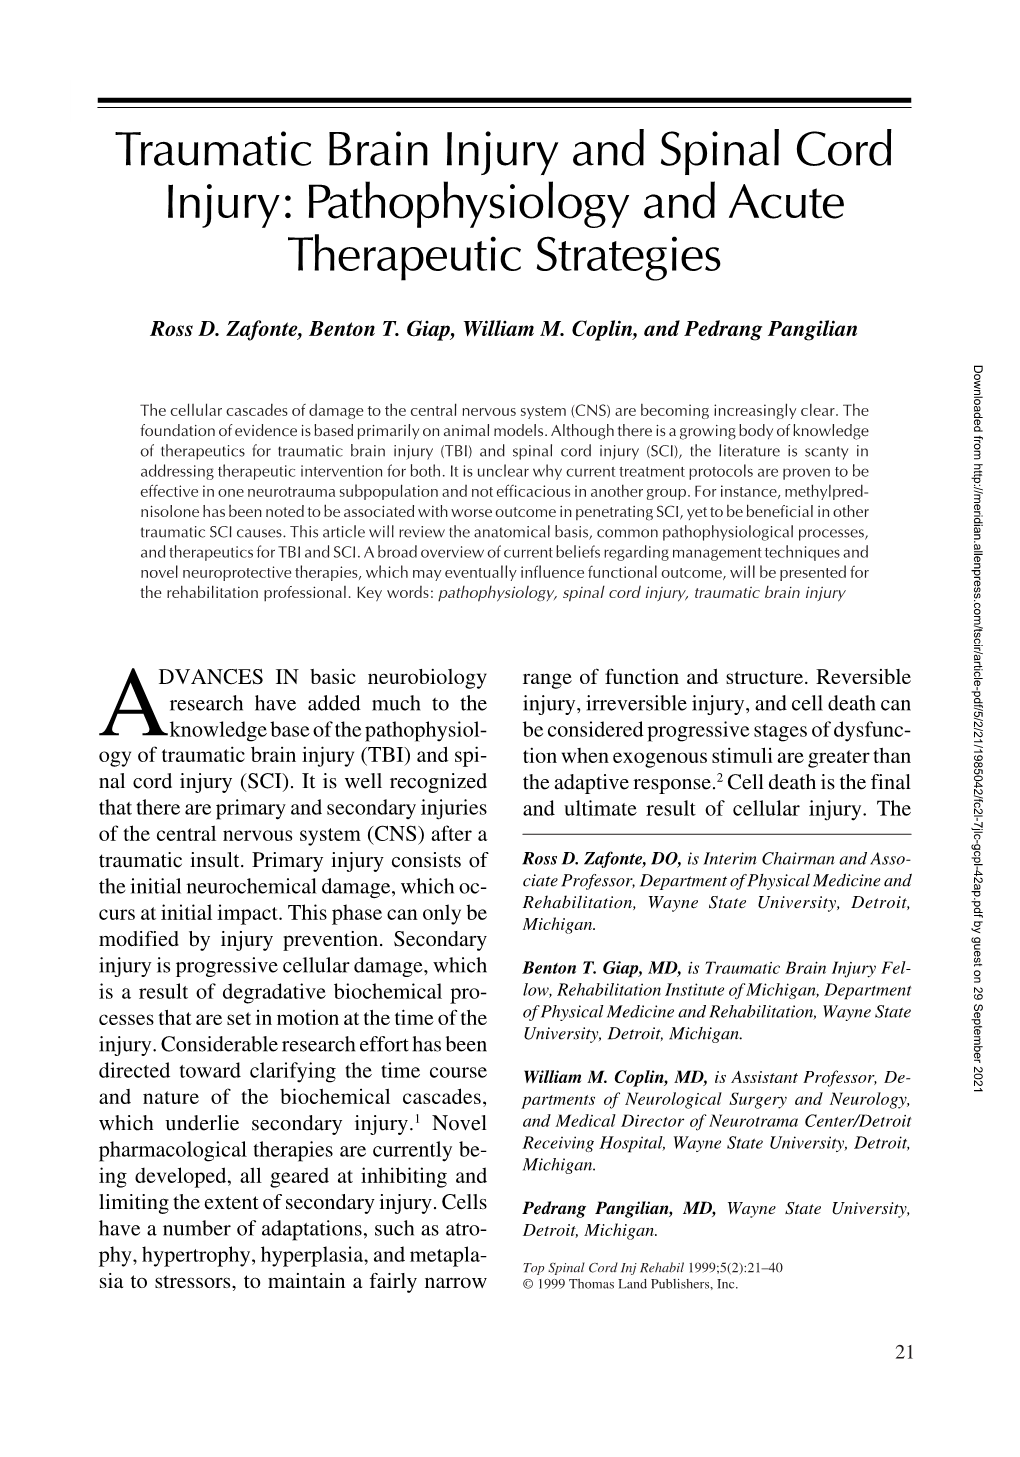 Traumatic Brain Injury and Spinal Cord Injury: Pathophysiology and Acute Therapeutic Strategies